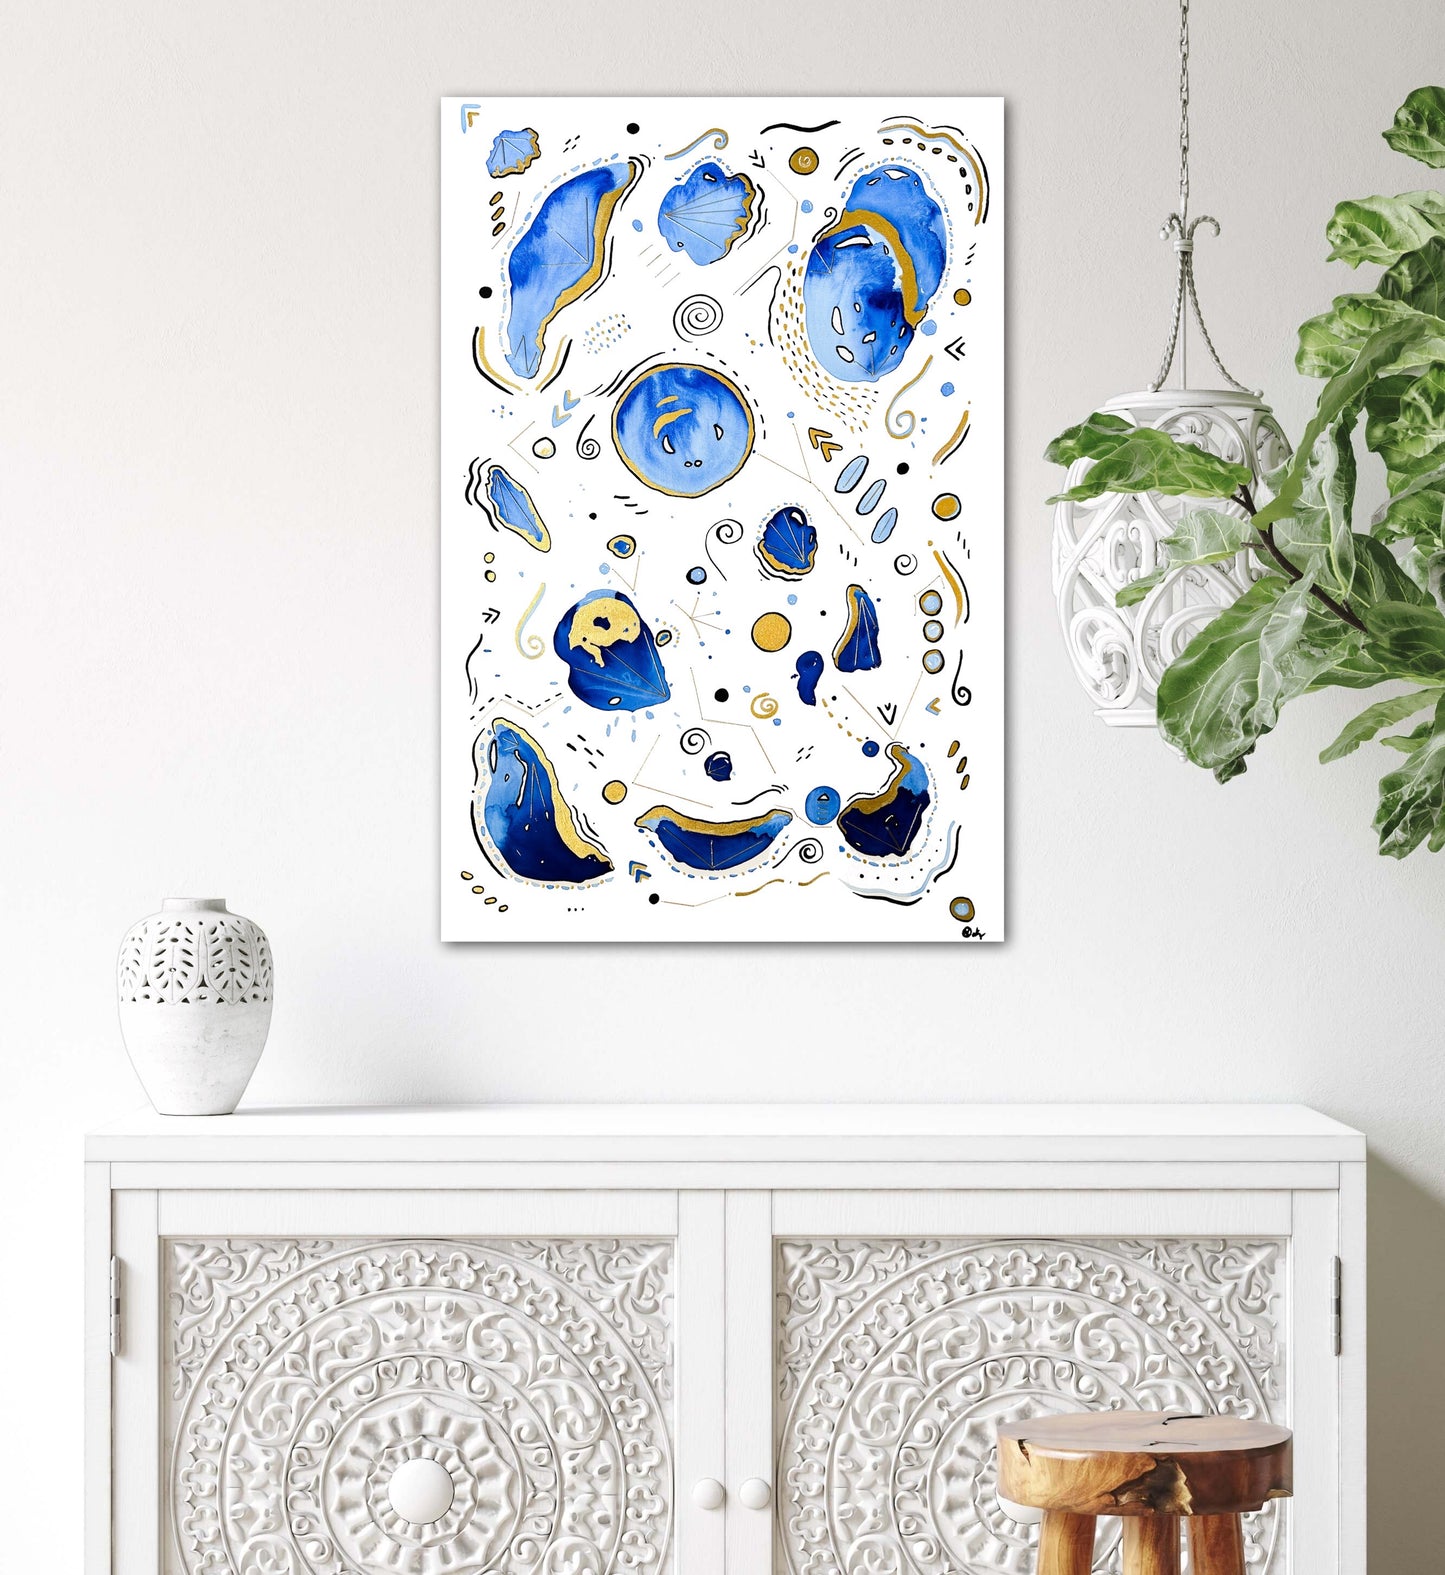 Solar Sea Abstract Embellished Fine Art Print - Signed By The Artist